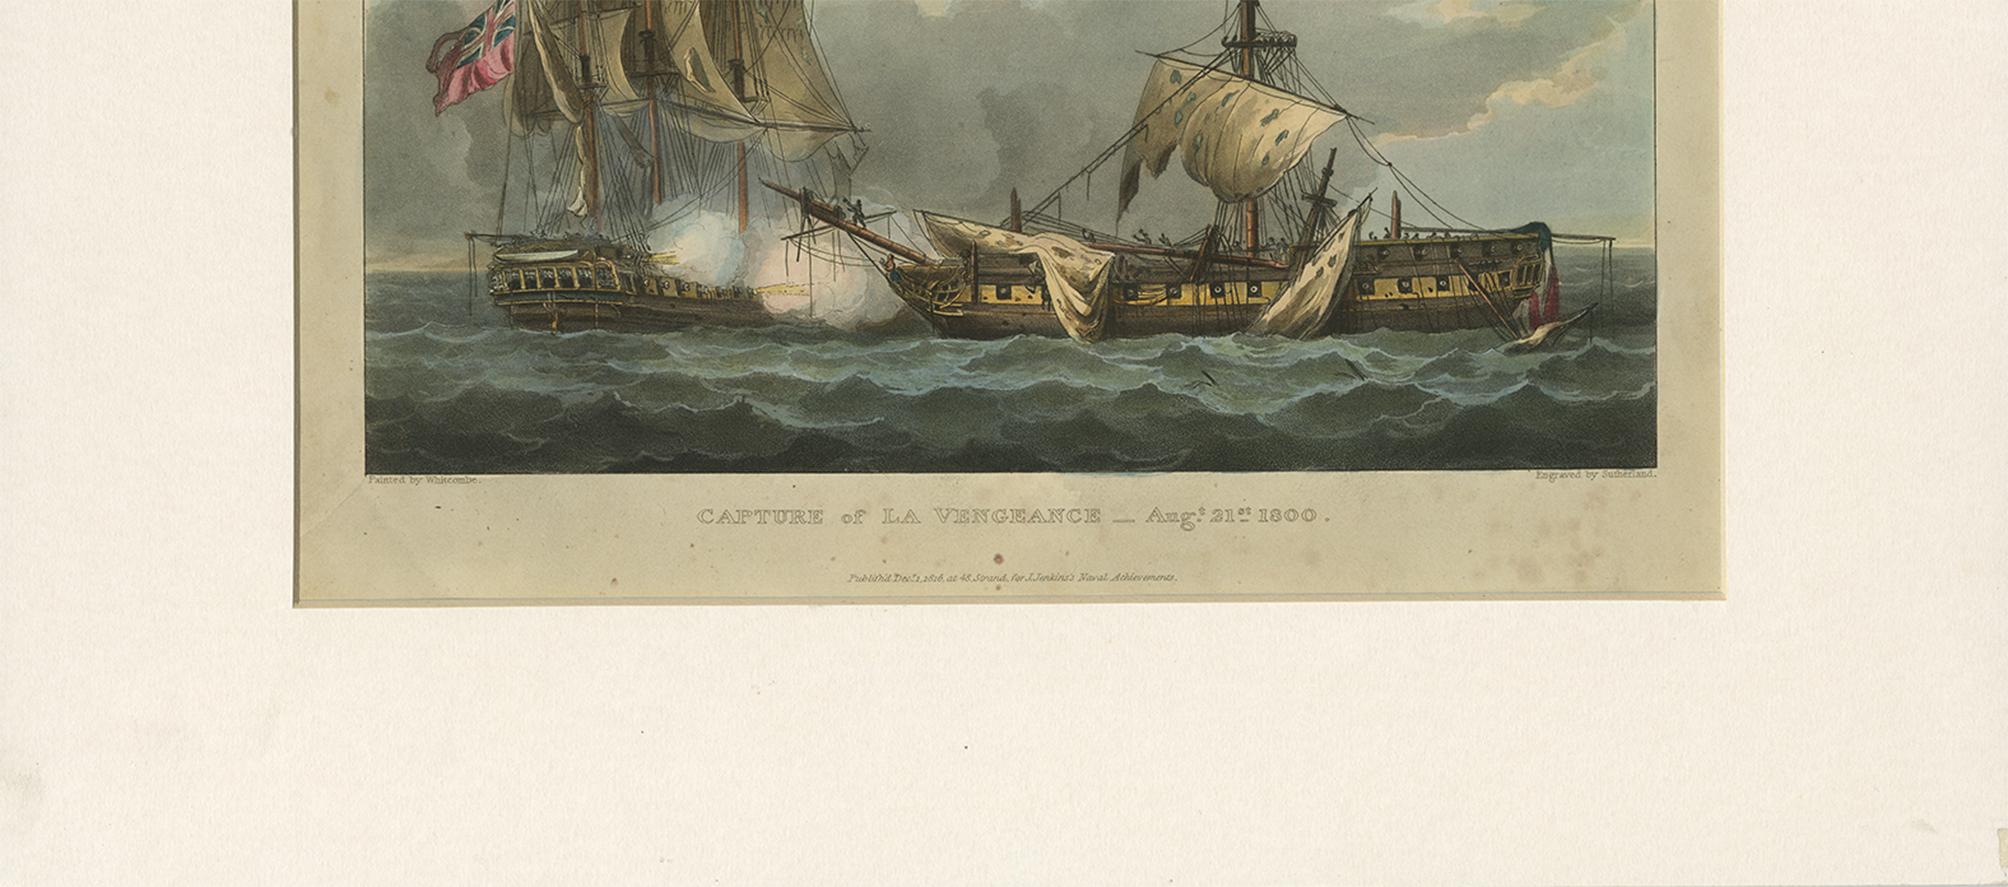 Paper Antique Print of the Capture of La Vengeance by T. Sutherland, circa 1816